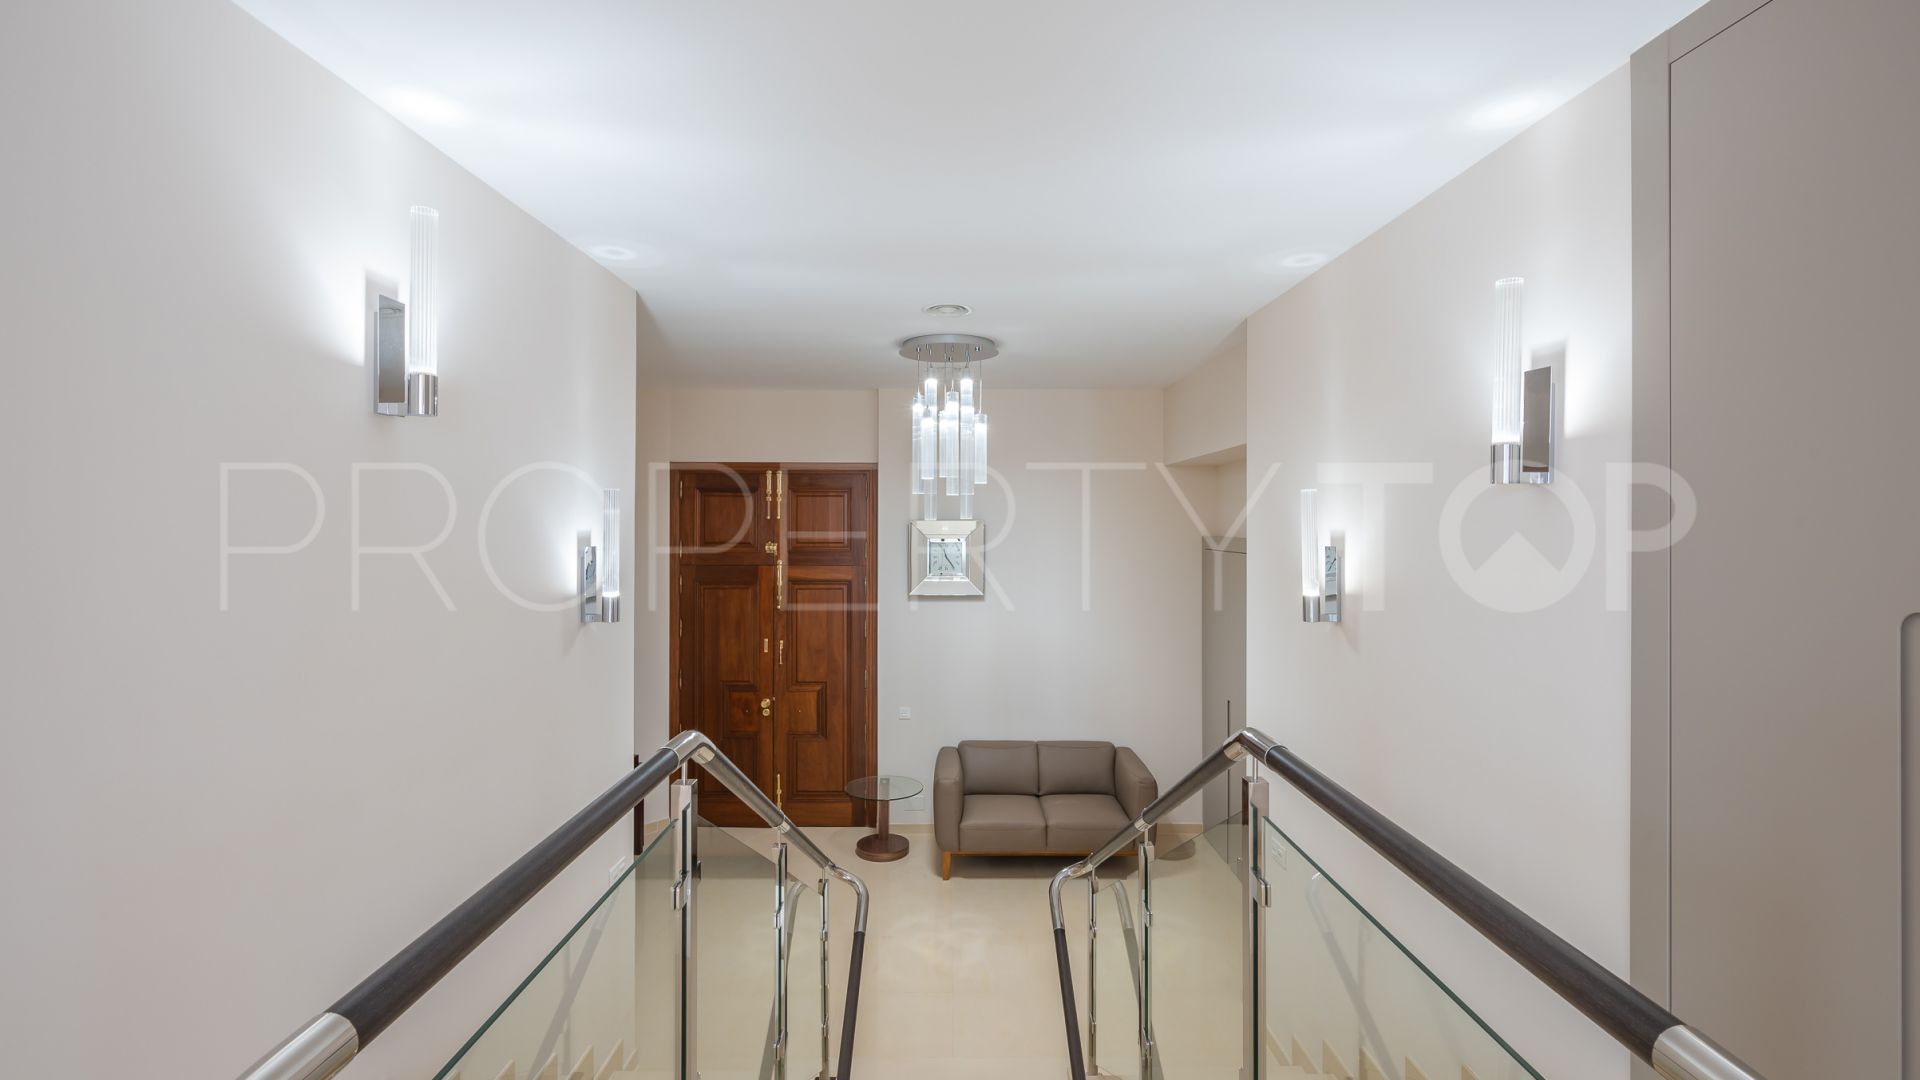 For sale ground floor apartment in Gray D'Albion with 6 bedrooms